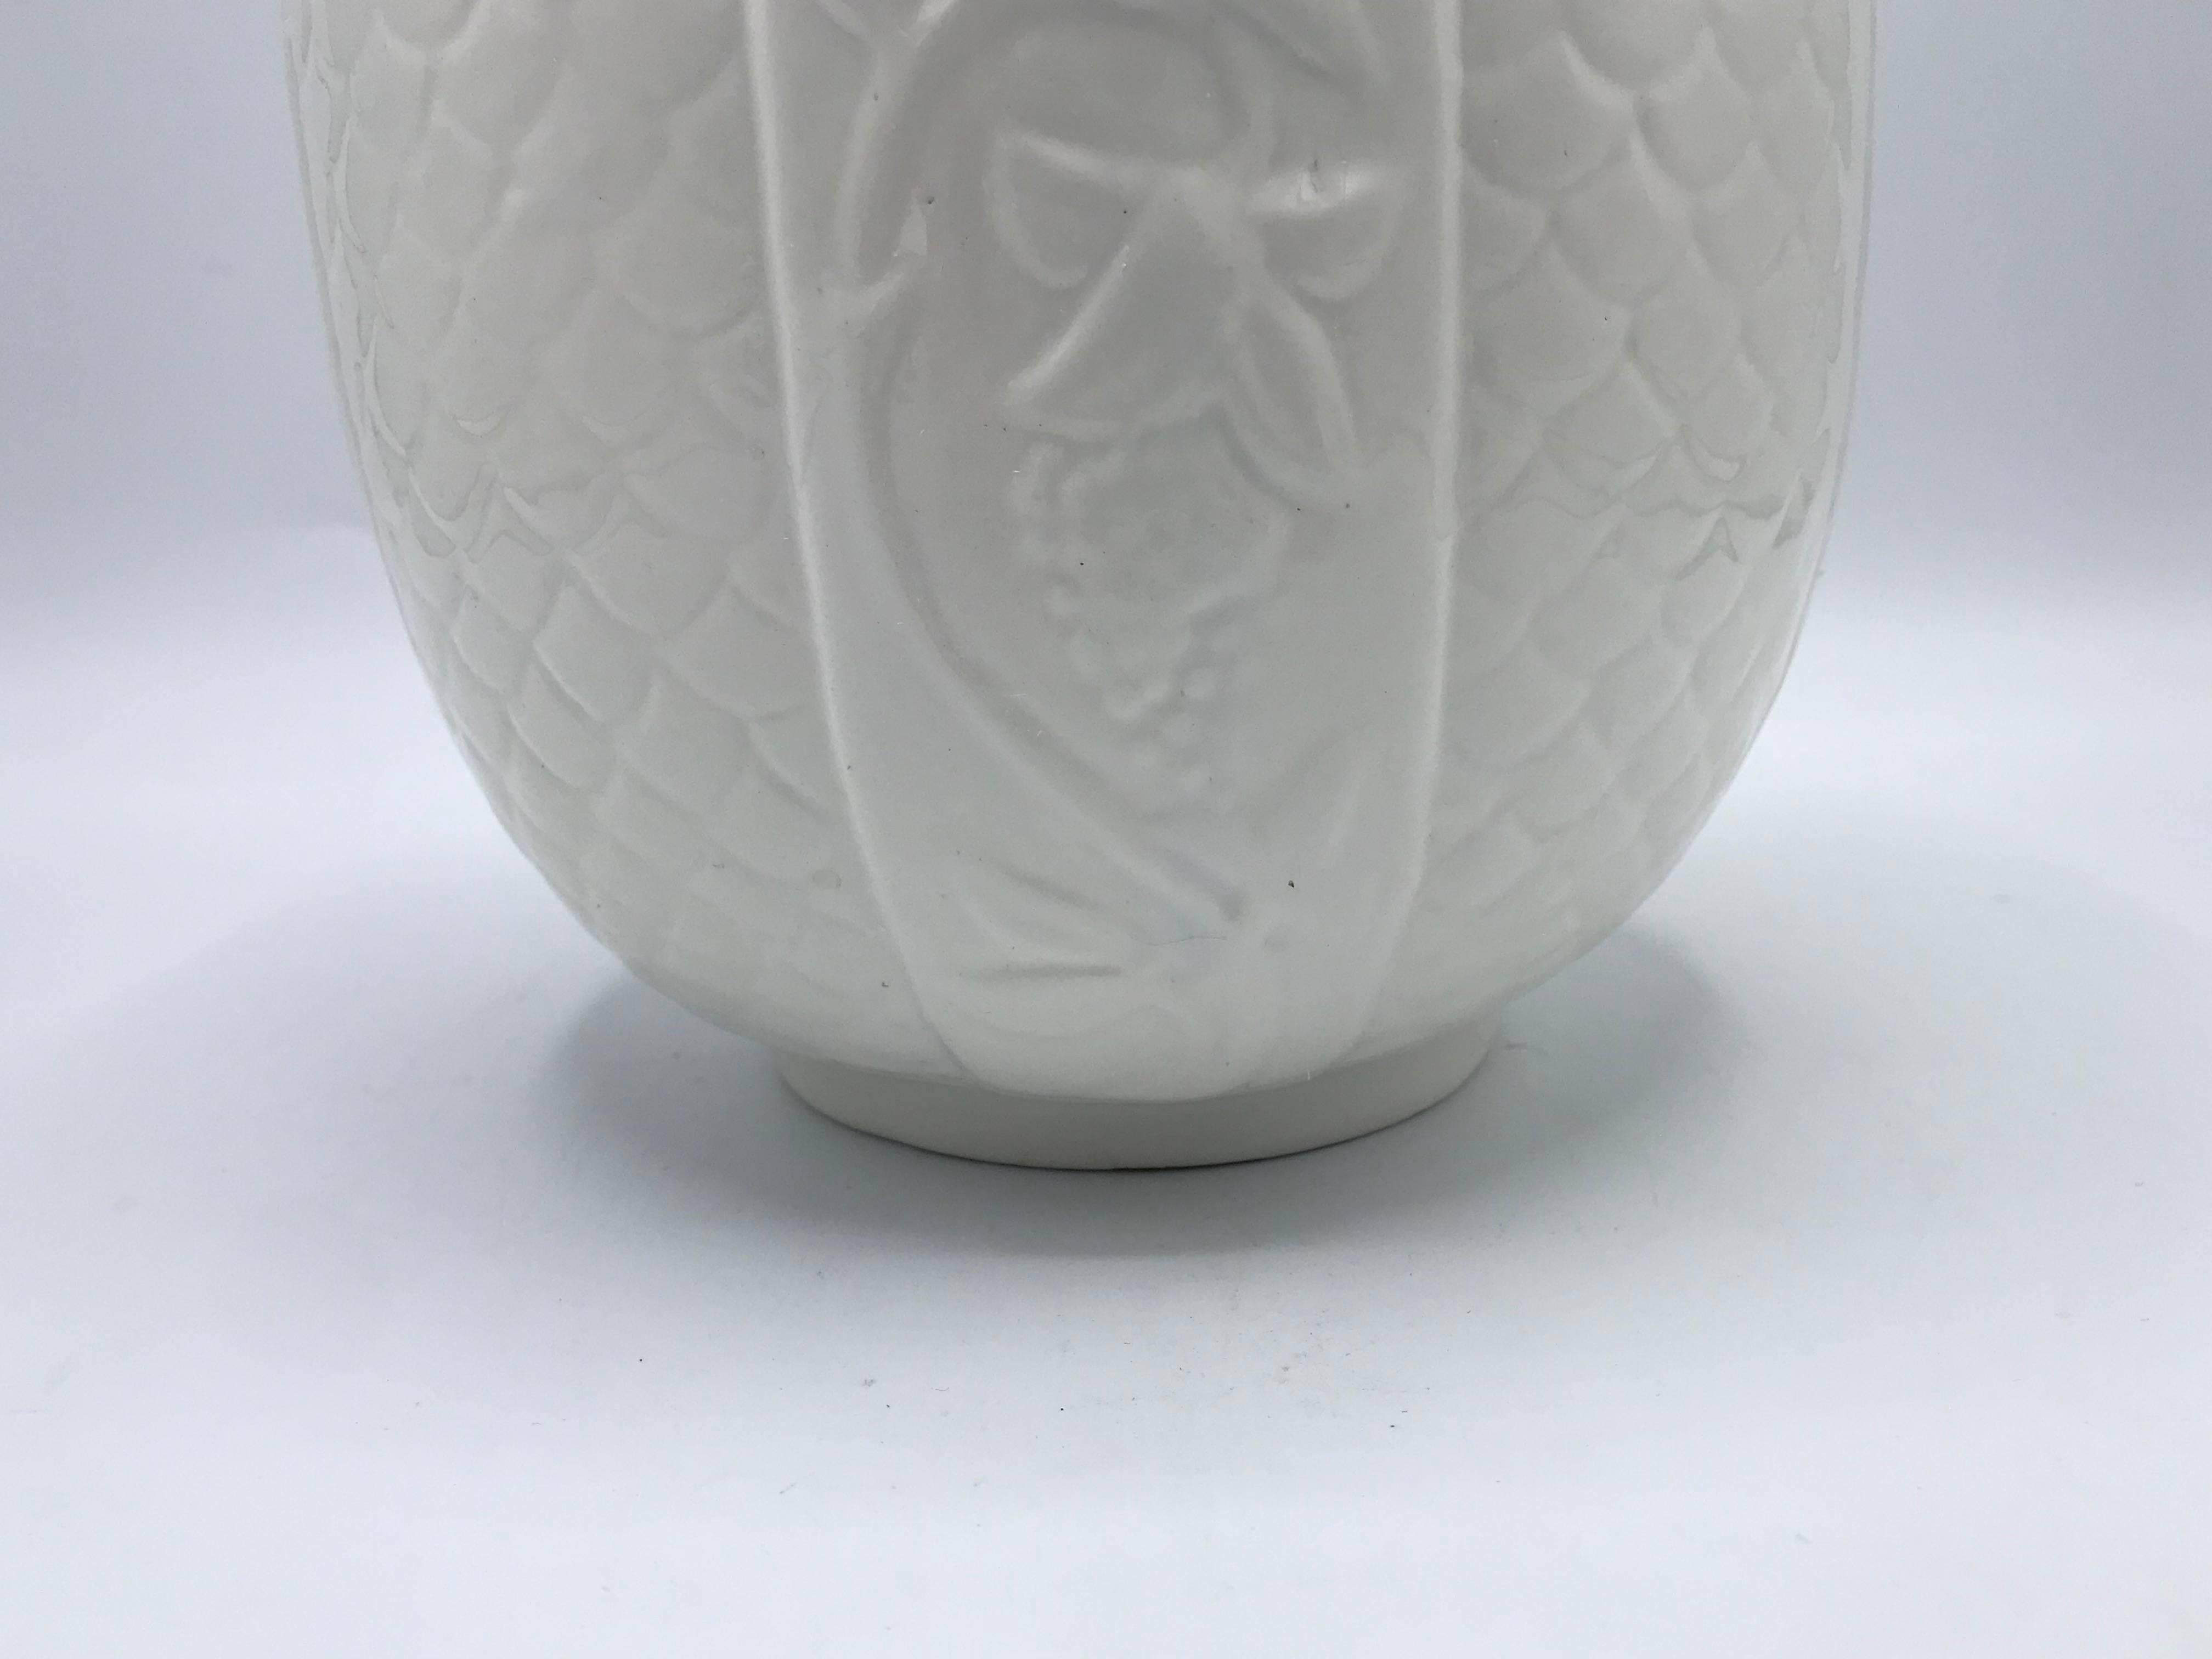 1960s Italian Ceramic Urn Jar with Floral and Pineapple Motif In Good Condition For Sale In Richmond, VA